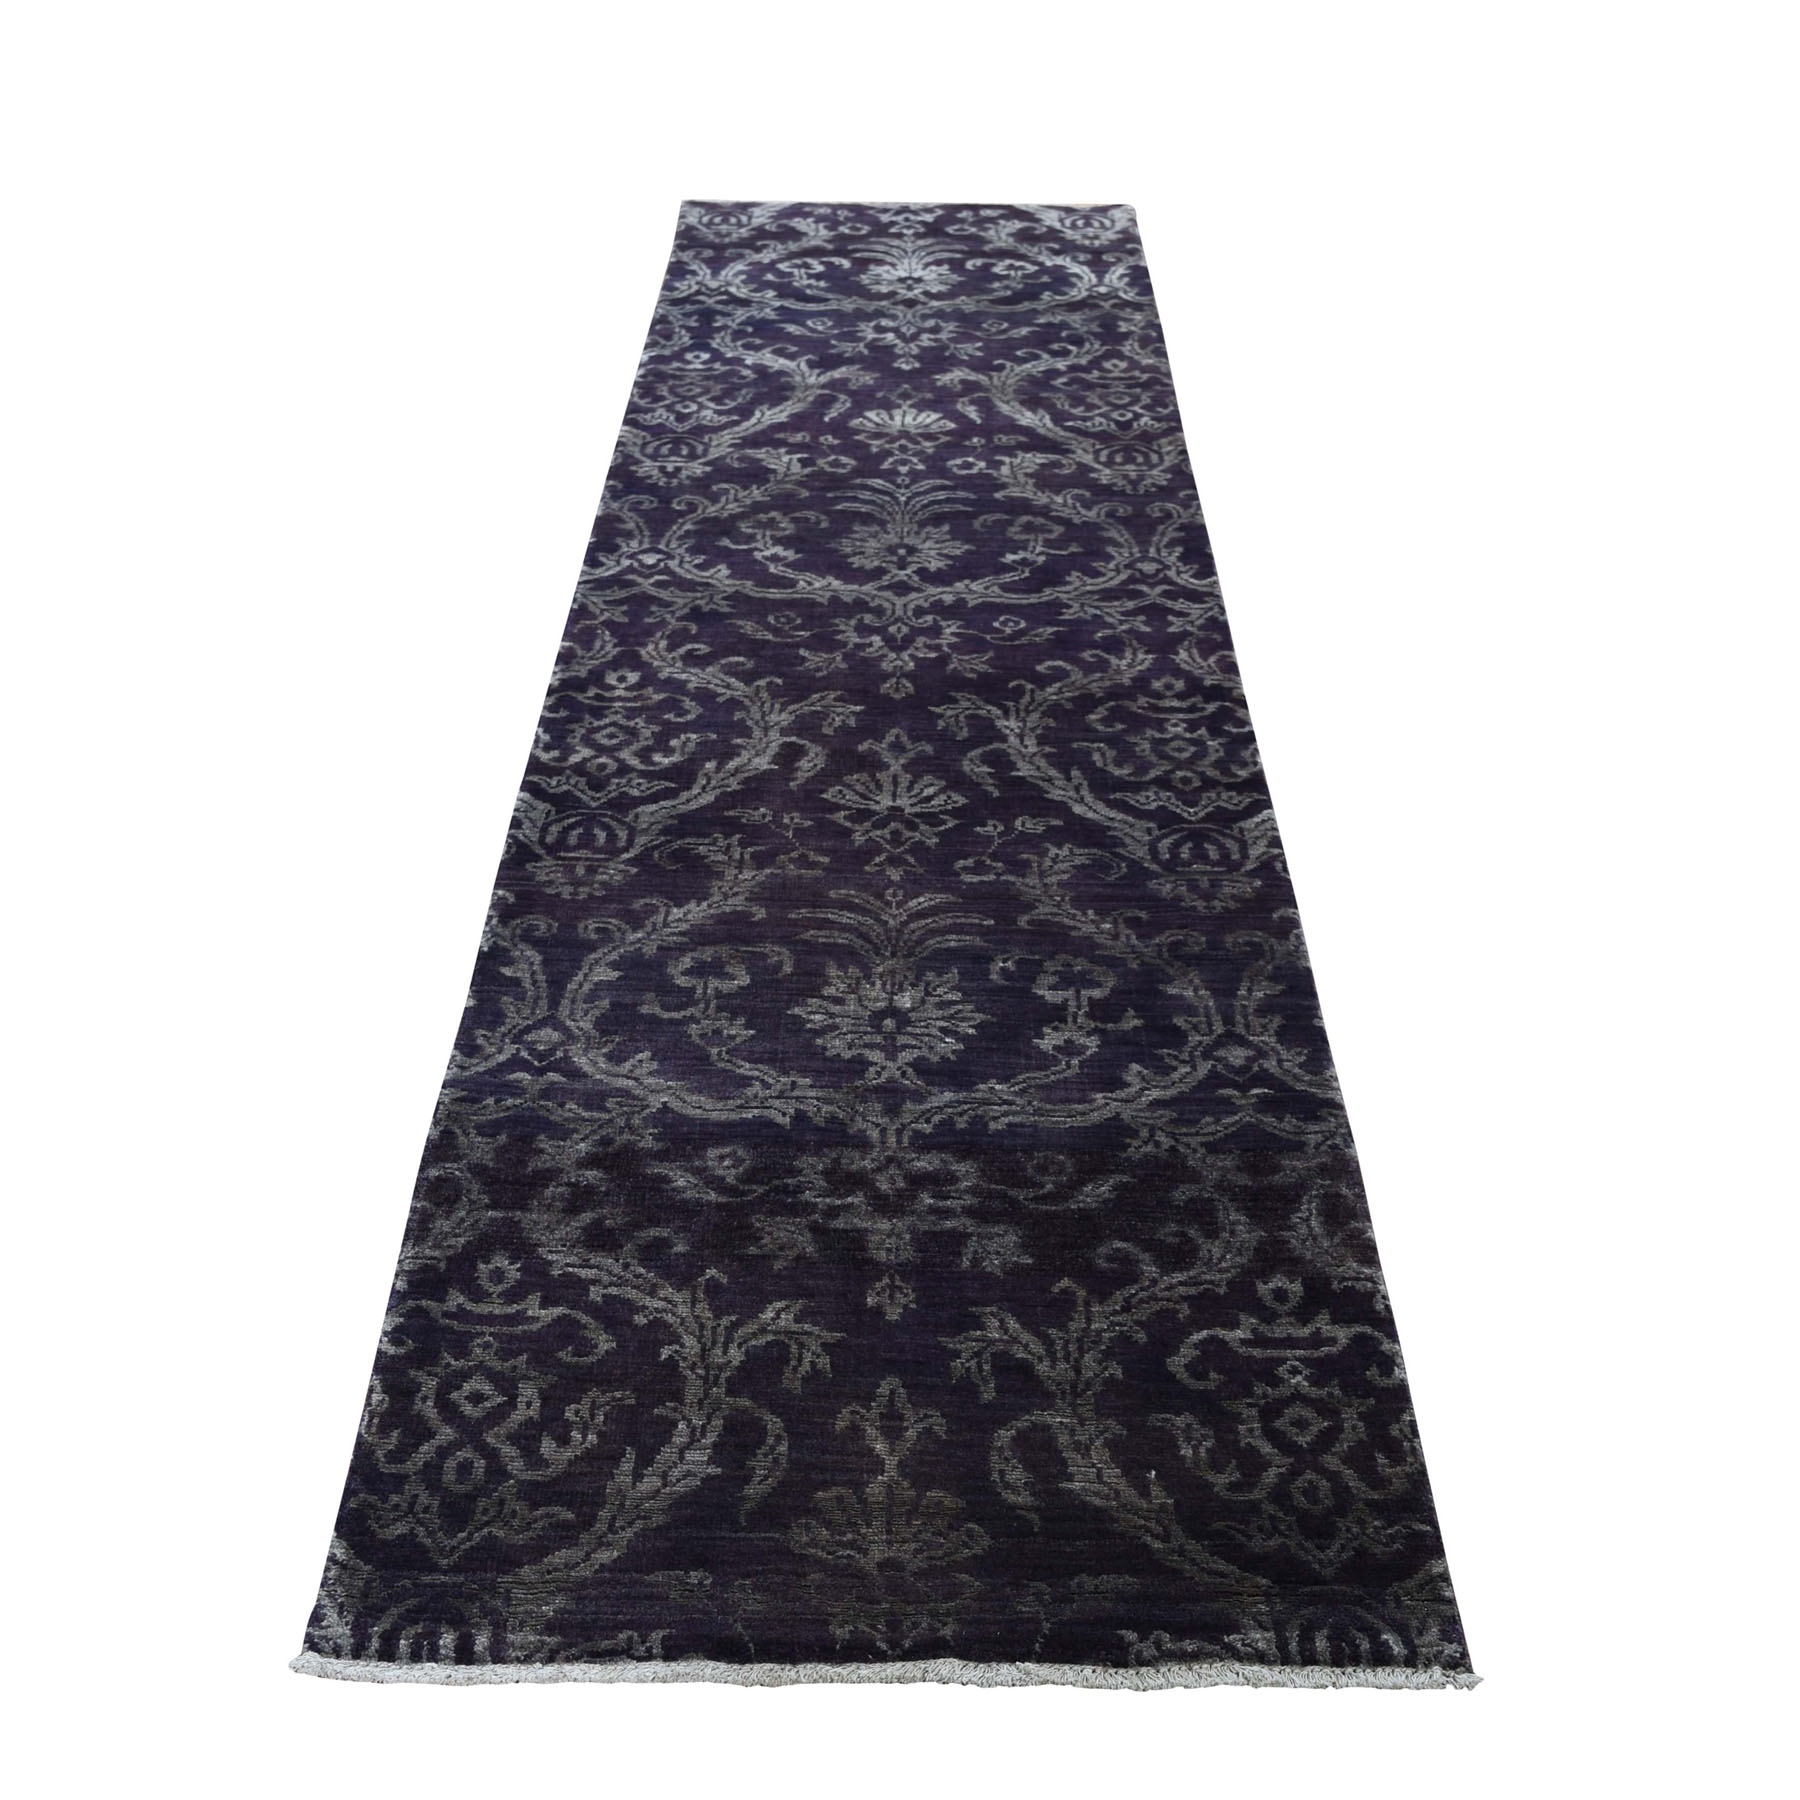 2'5"x9'8" Damask Runner Tone on Tone Wool and Silk Hand Woven Oriental Rug 